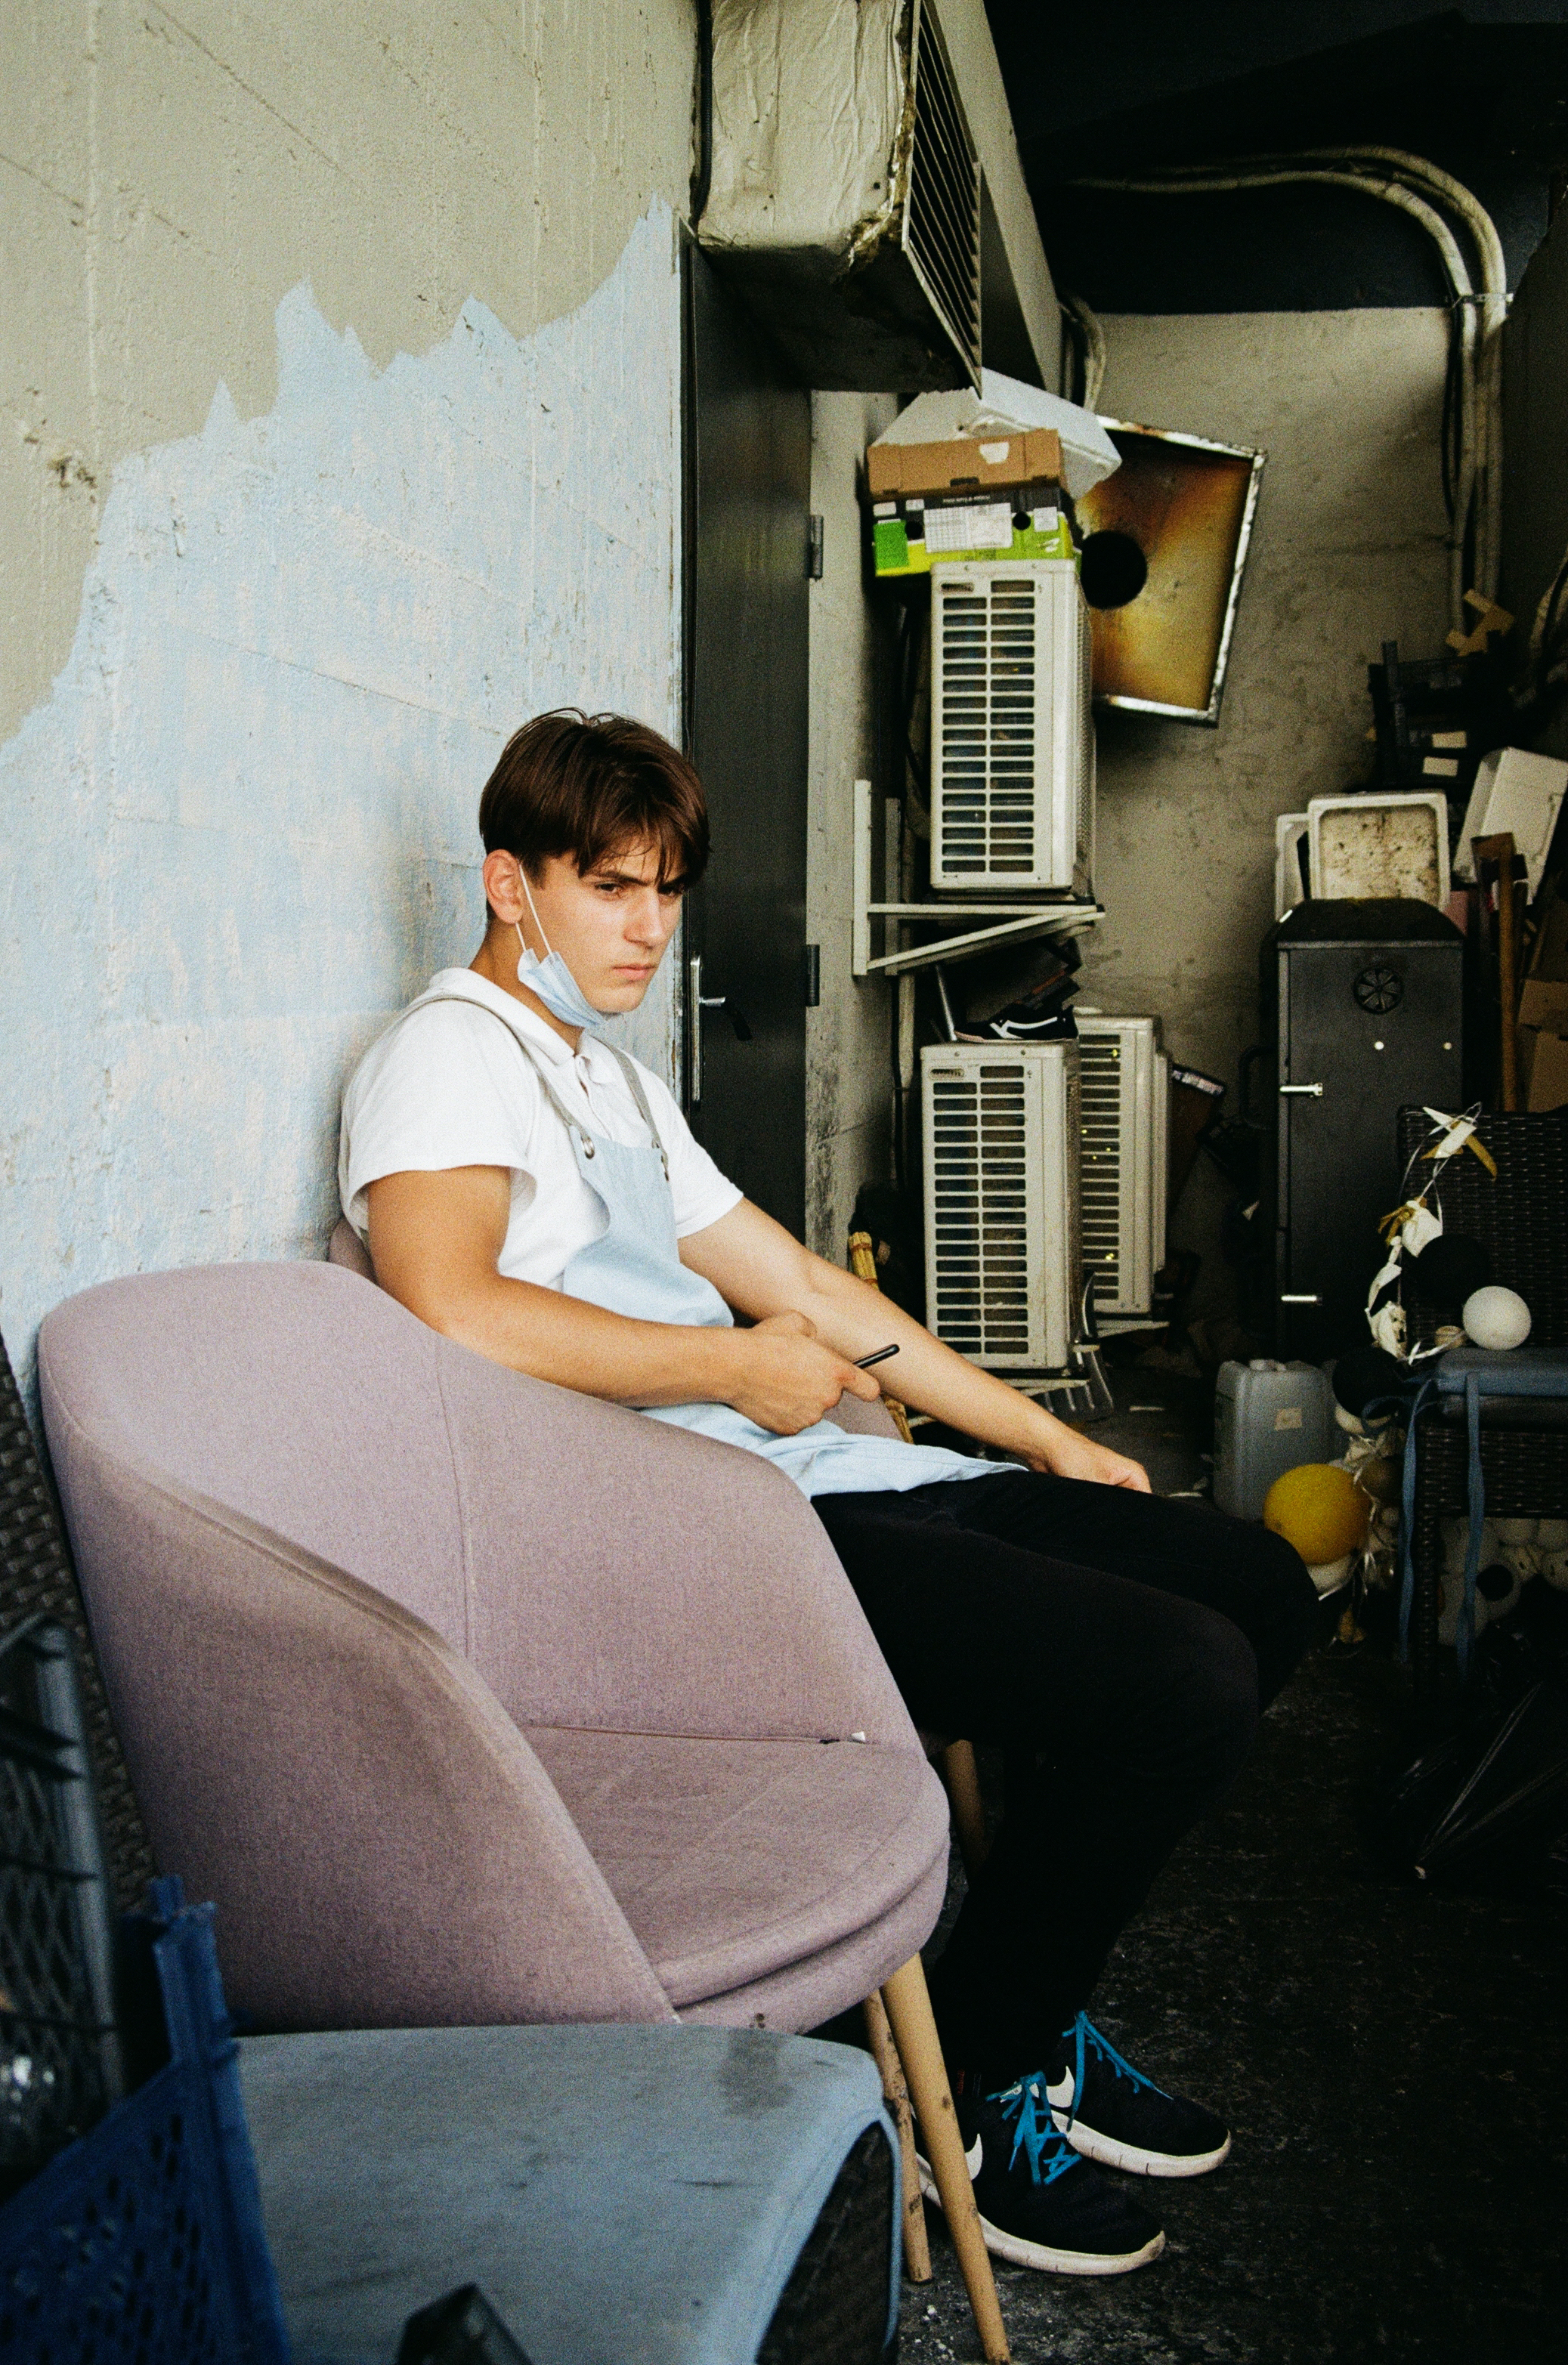 A boy in an apron sitting on a chair in front of a half painted wall.